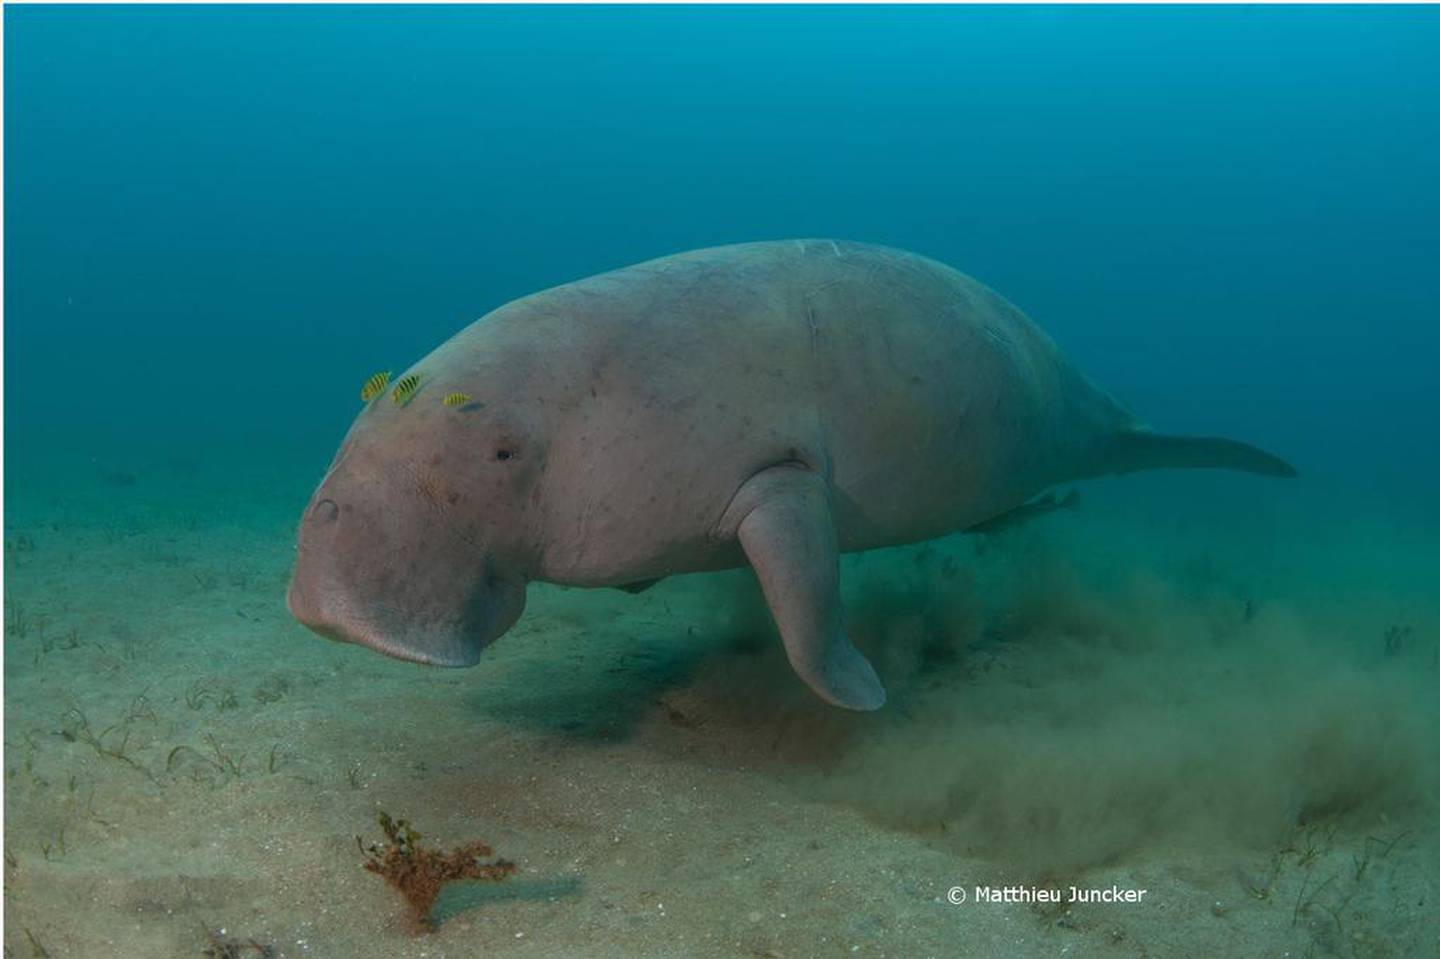 Dugongs can eat up to 40kg of seagrass a day. Matthieu Juncker / Mohammed bin Zayed Species Conservation Fund